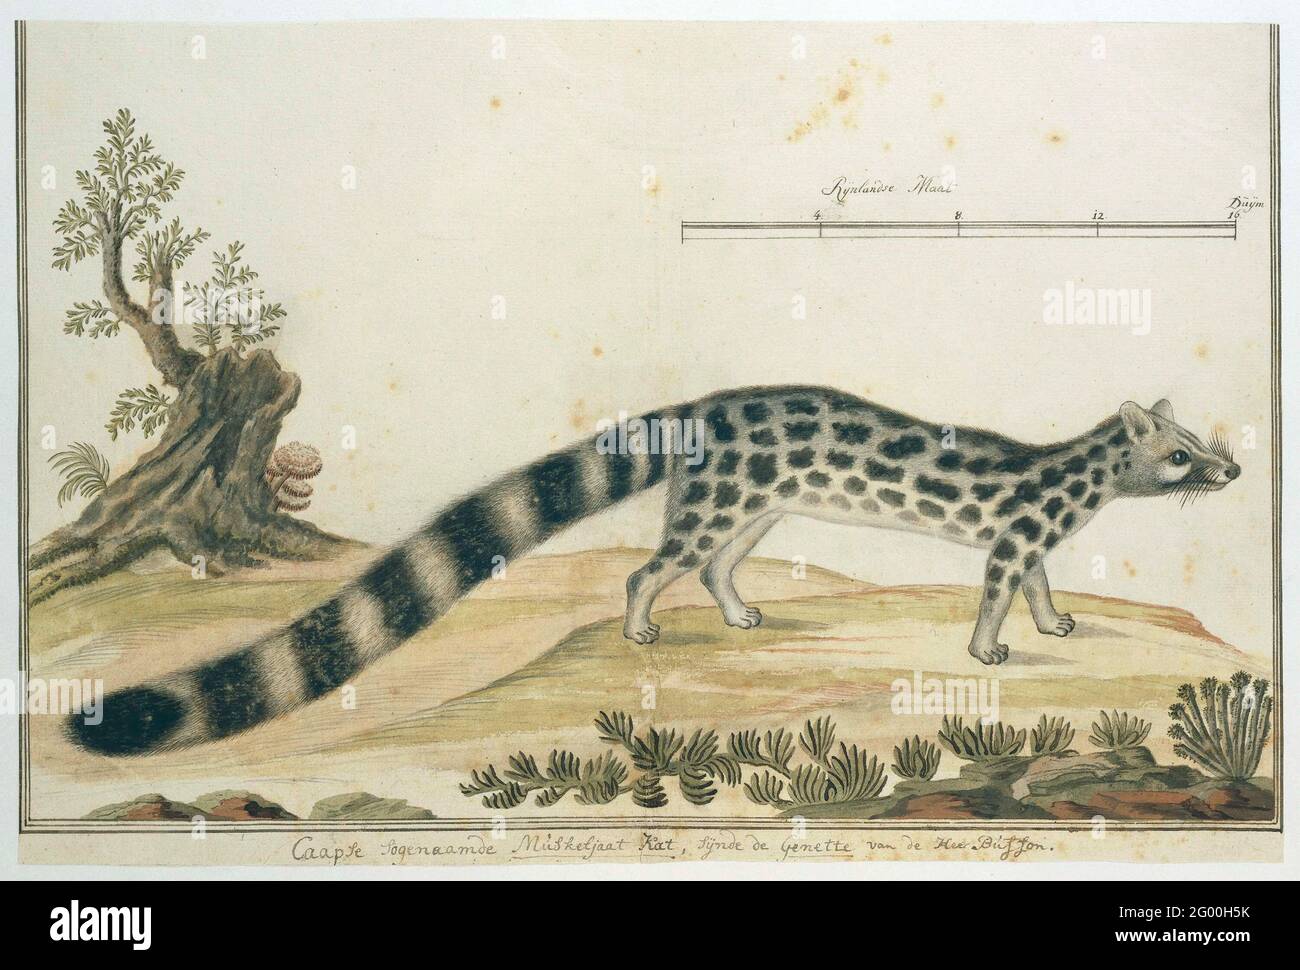 Genetta Tigrina (Cape Genet). Genetkat (genetta tigrina), in 1759 by Governor Ryk Tulbagh to the menagerie of Stadholder Willem V; after his death set up and accommodated in the stadholder collection. With a scale in Rijnlandse Maat. Stock Photo